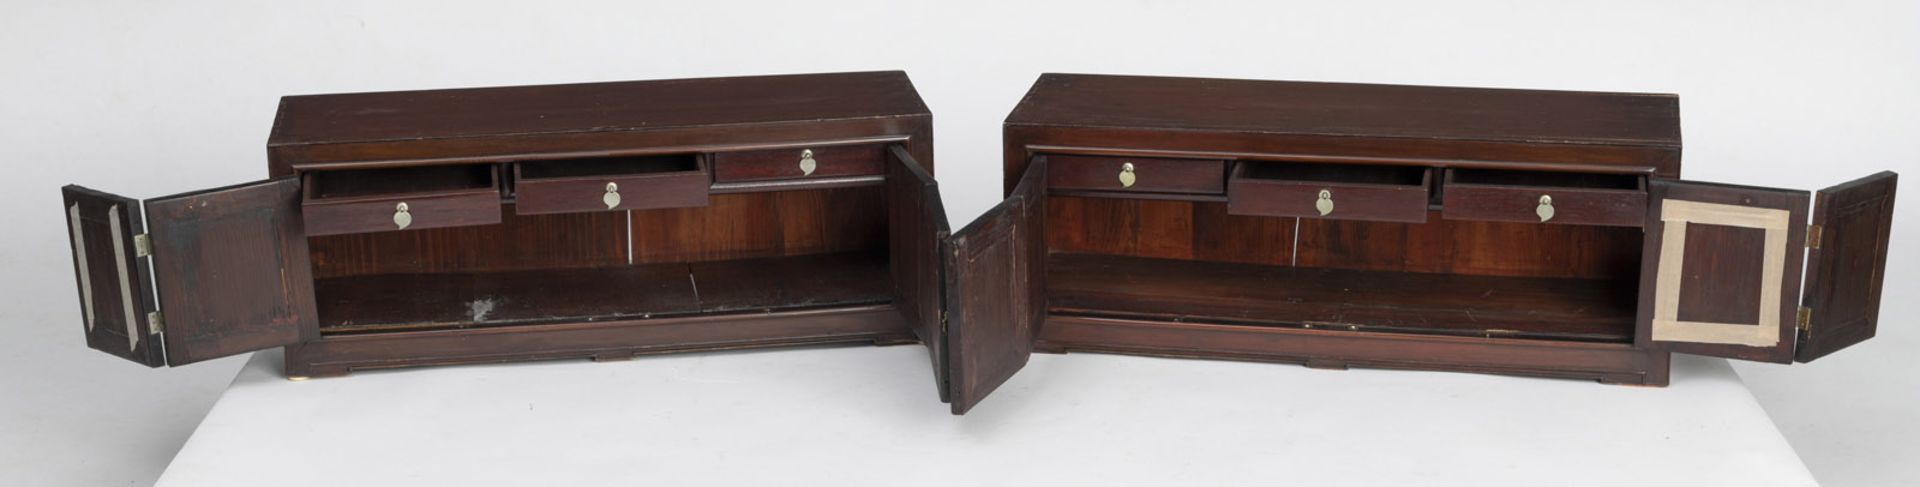 A PAIR OF FLAT WOODEN CUPBOARDS (MUNGAB), EACH WITH HINGED TWO-PARTS DOORS, INLAID WITH MARBLE PANE - Image 2 of 8